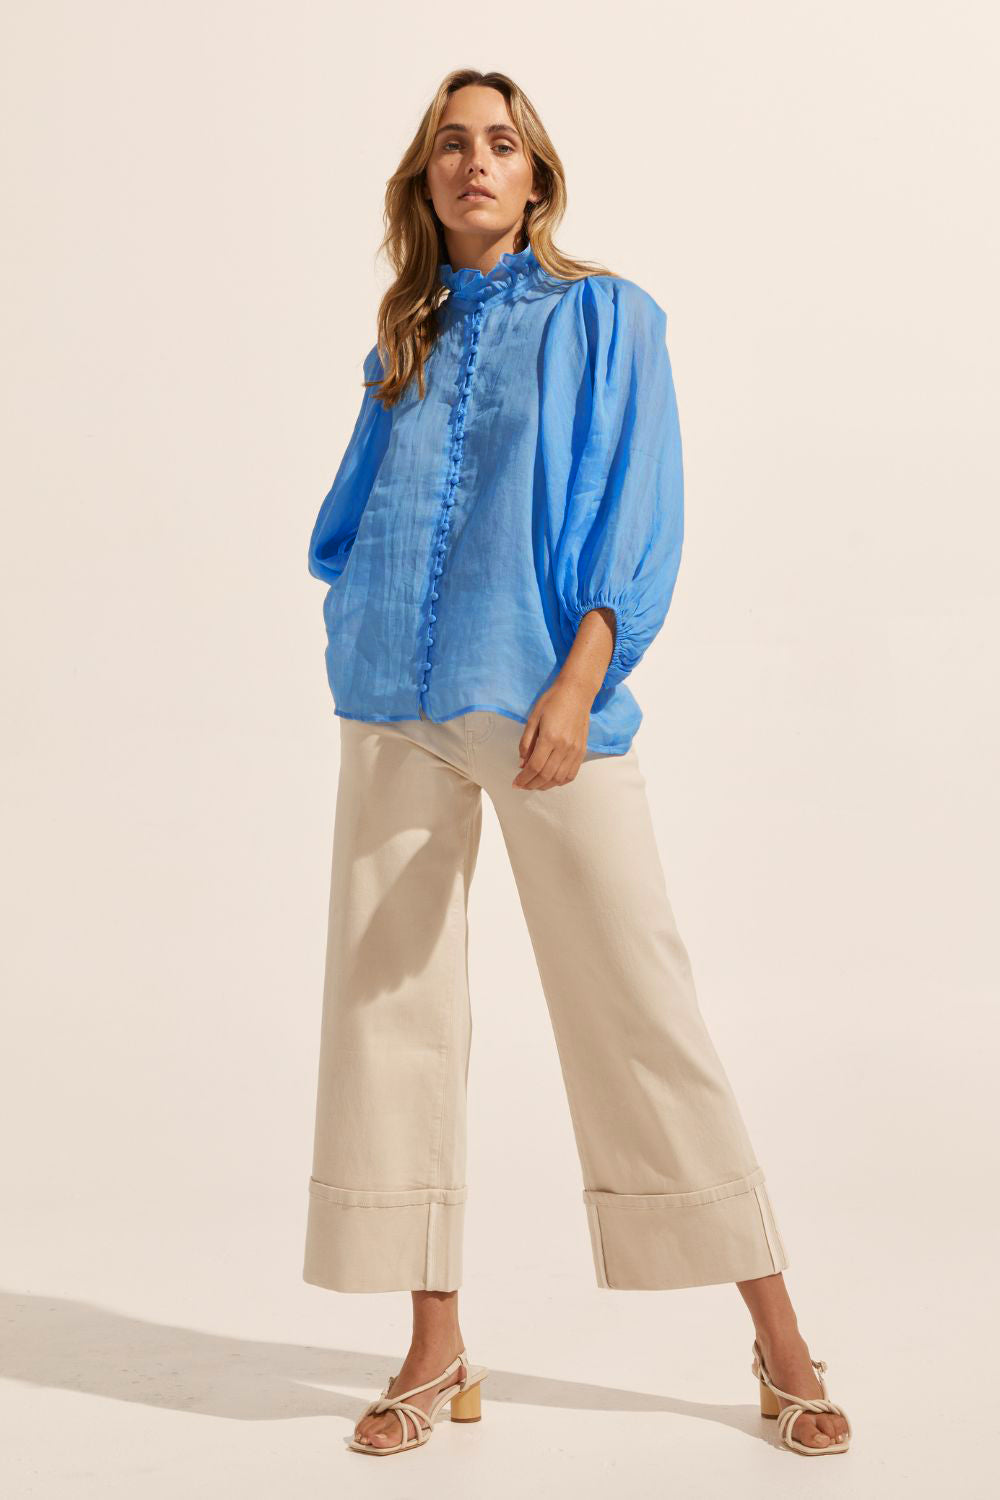 blue, ruffle neck collar, buttons down centre, mid length sleeve, shirt, front view